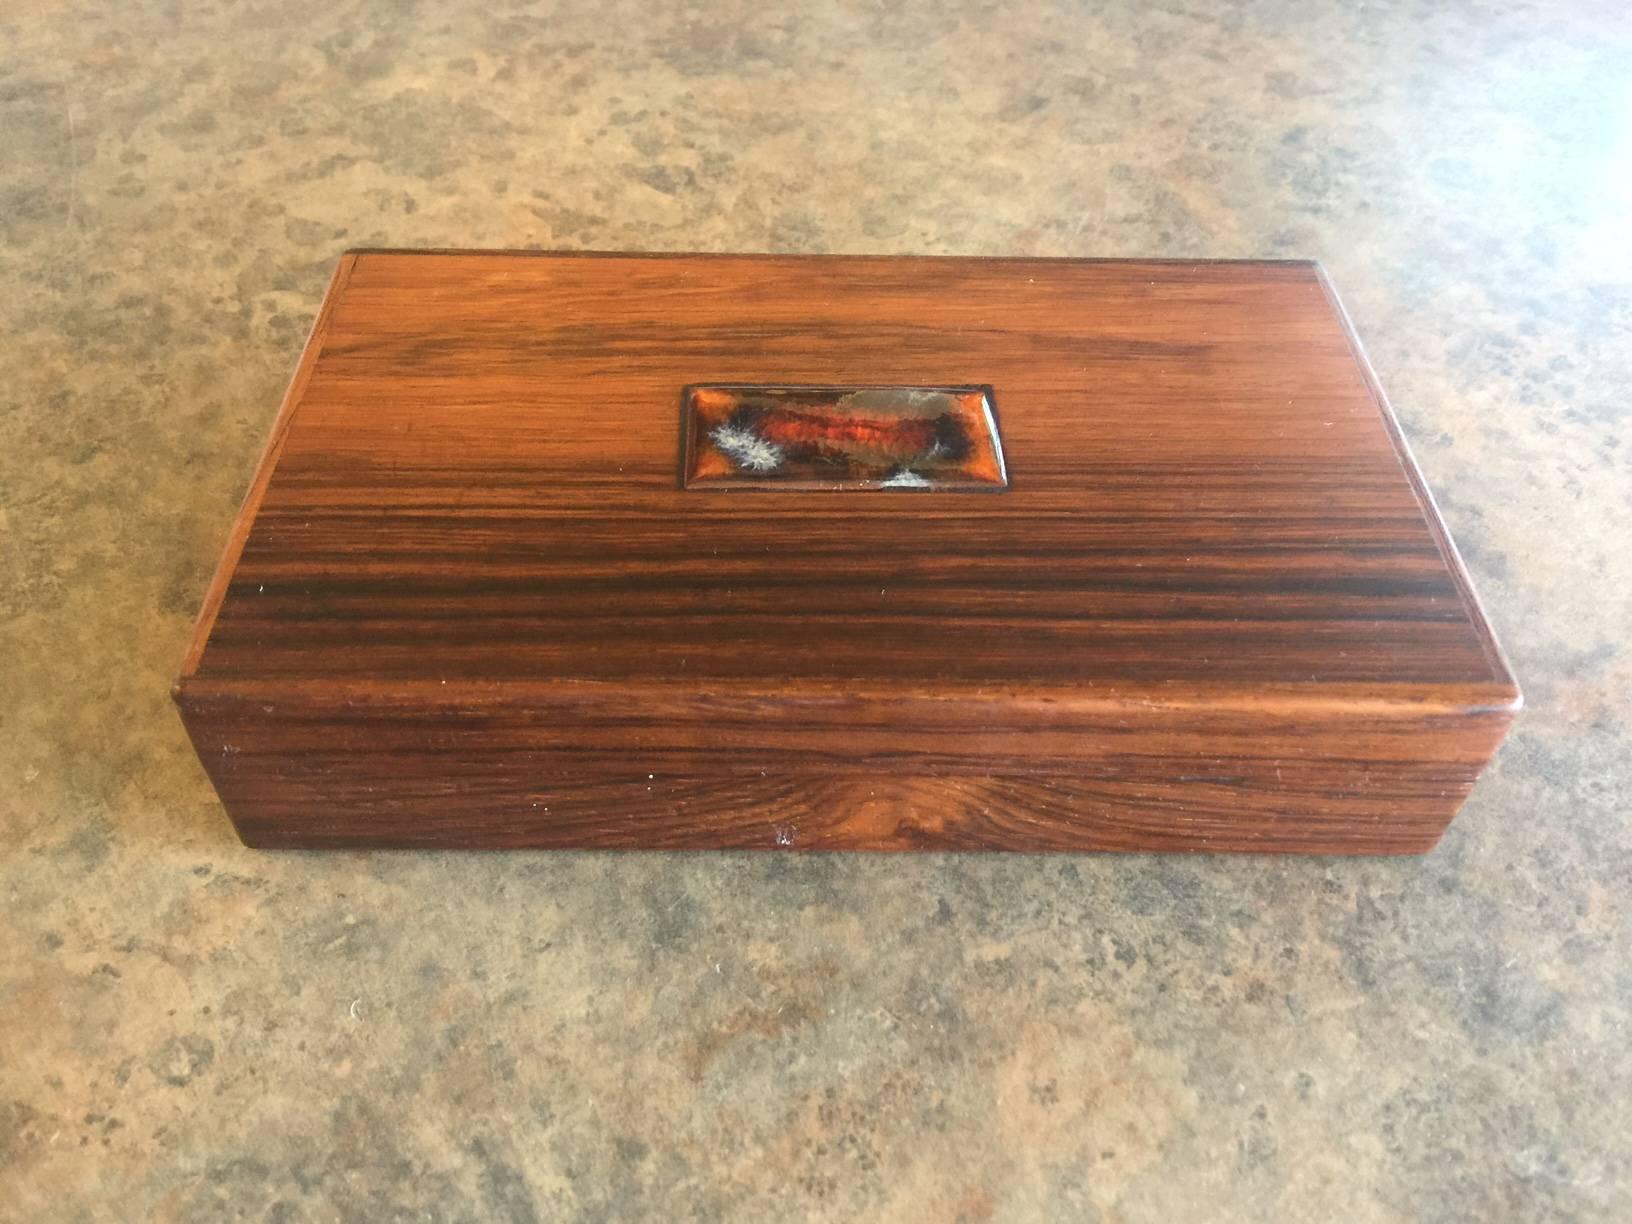 Beautifully crafted solid rosewood trinket box / humidor with divider by Danish craftsman Alfred Klitgaard. This pieces was produced in the late 1950s-early 1960s. The construction is very high quality with a gorgeous Bodil Eje orange ceramic tile